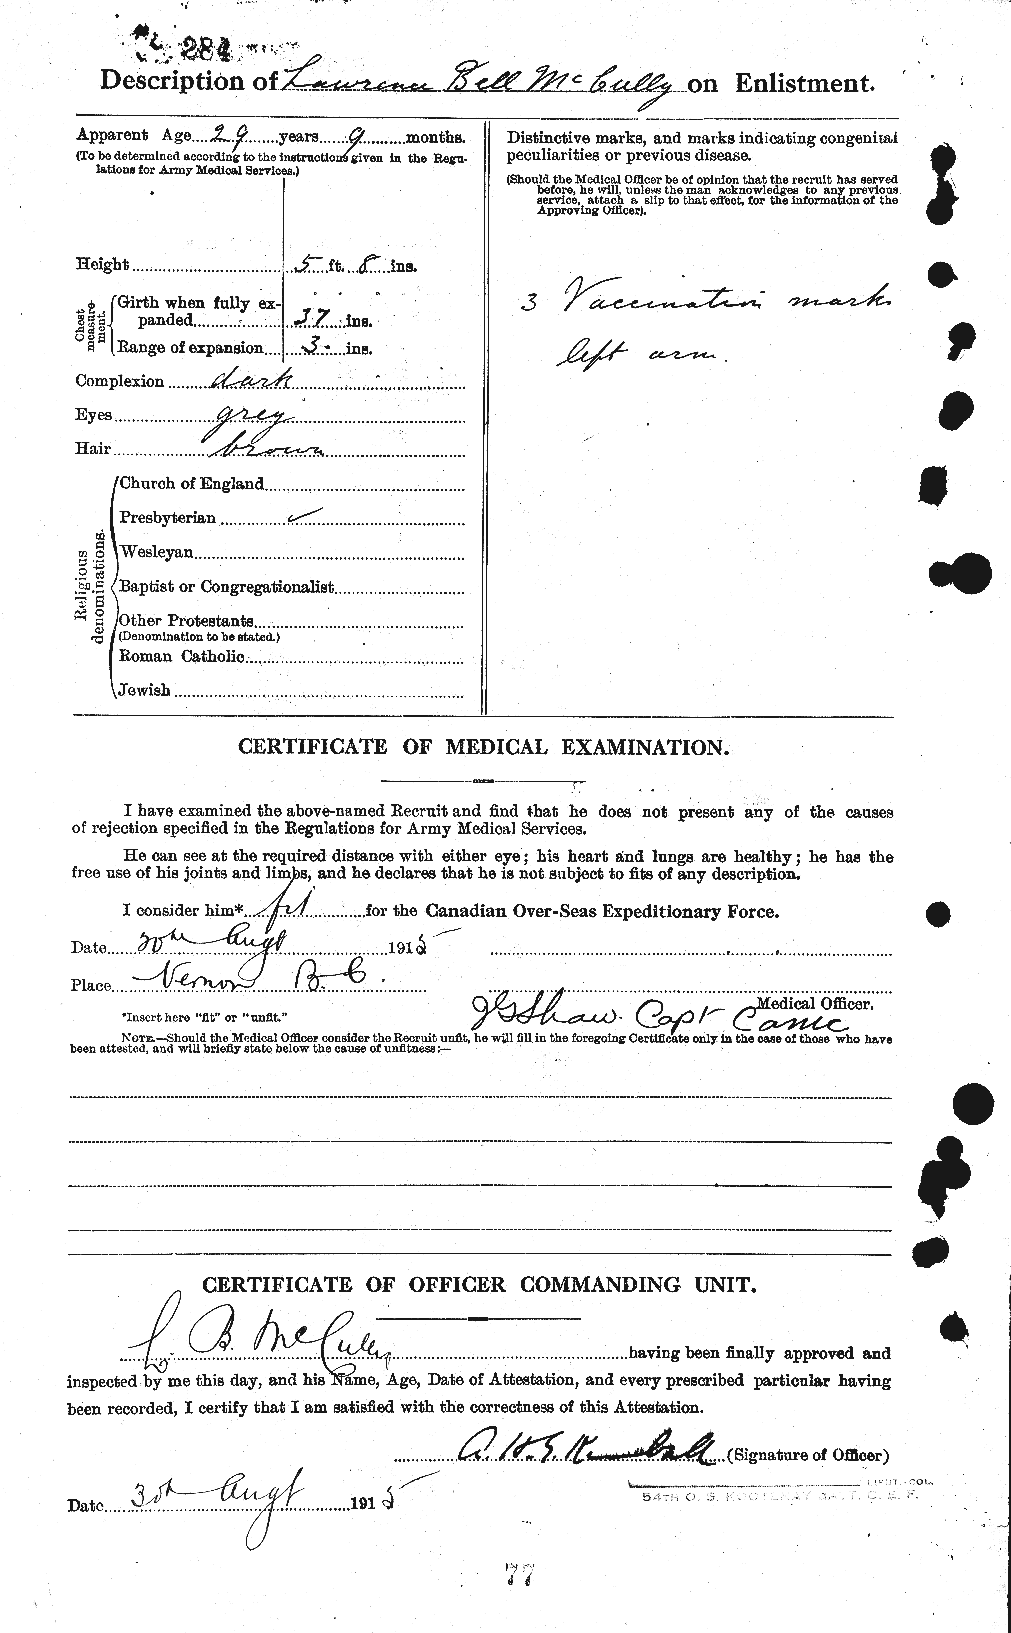 Personnel Records of the First World War - CEF 136819b